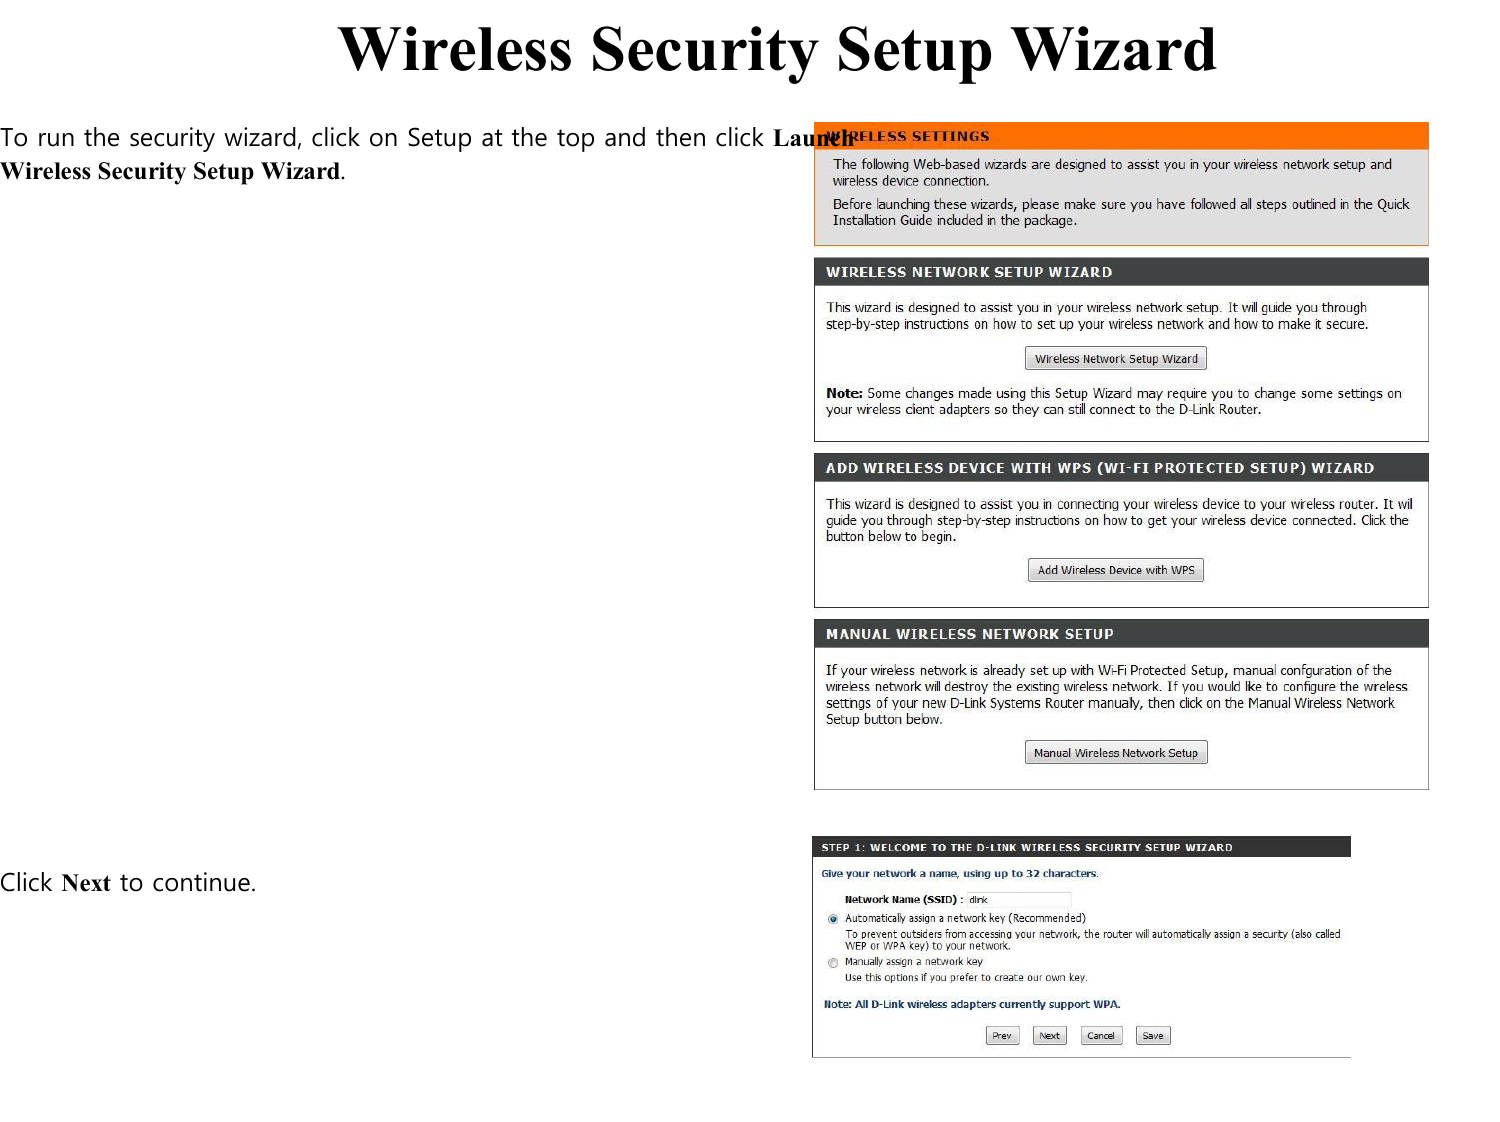    Wireless Security Setup Wizard  To run the security wizard, click on Setup at the top and then click Launch Wireless Security Setup Wizard.                               Click Next to continue.                                                          